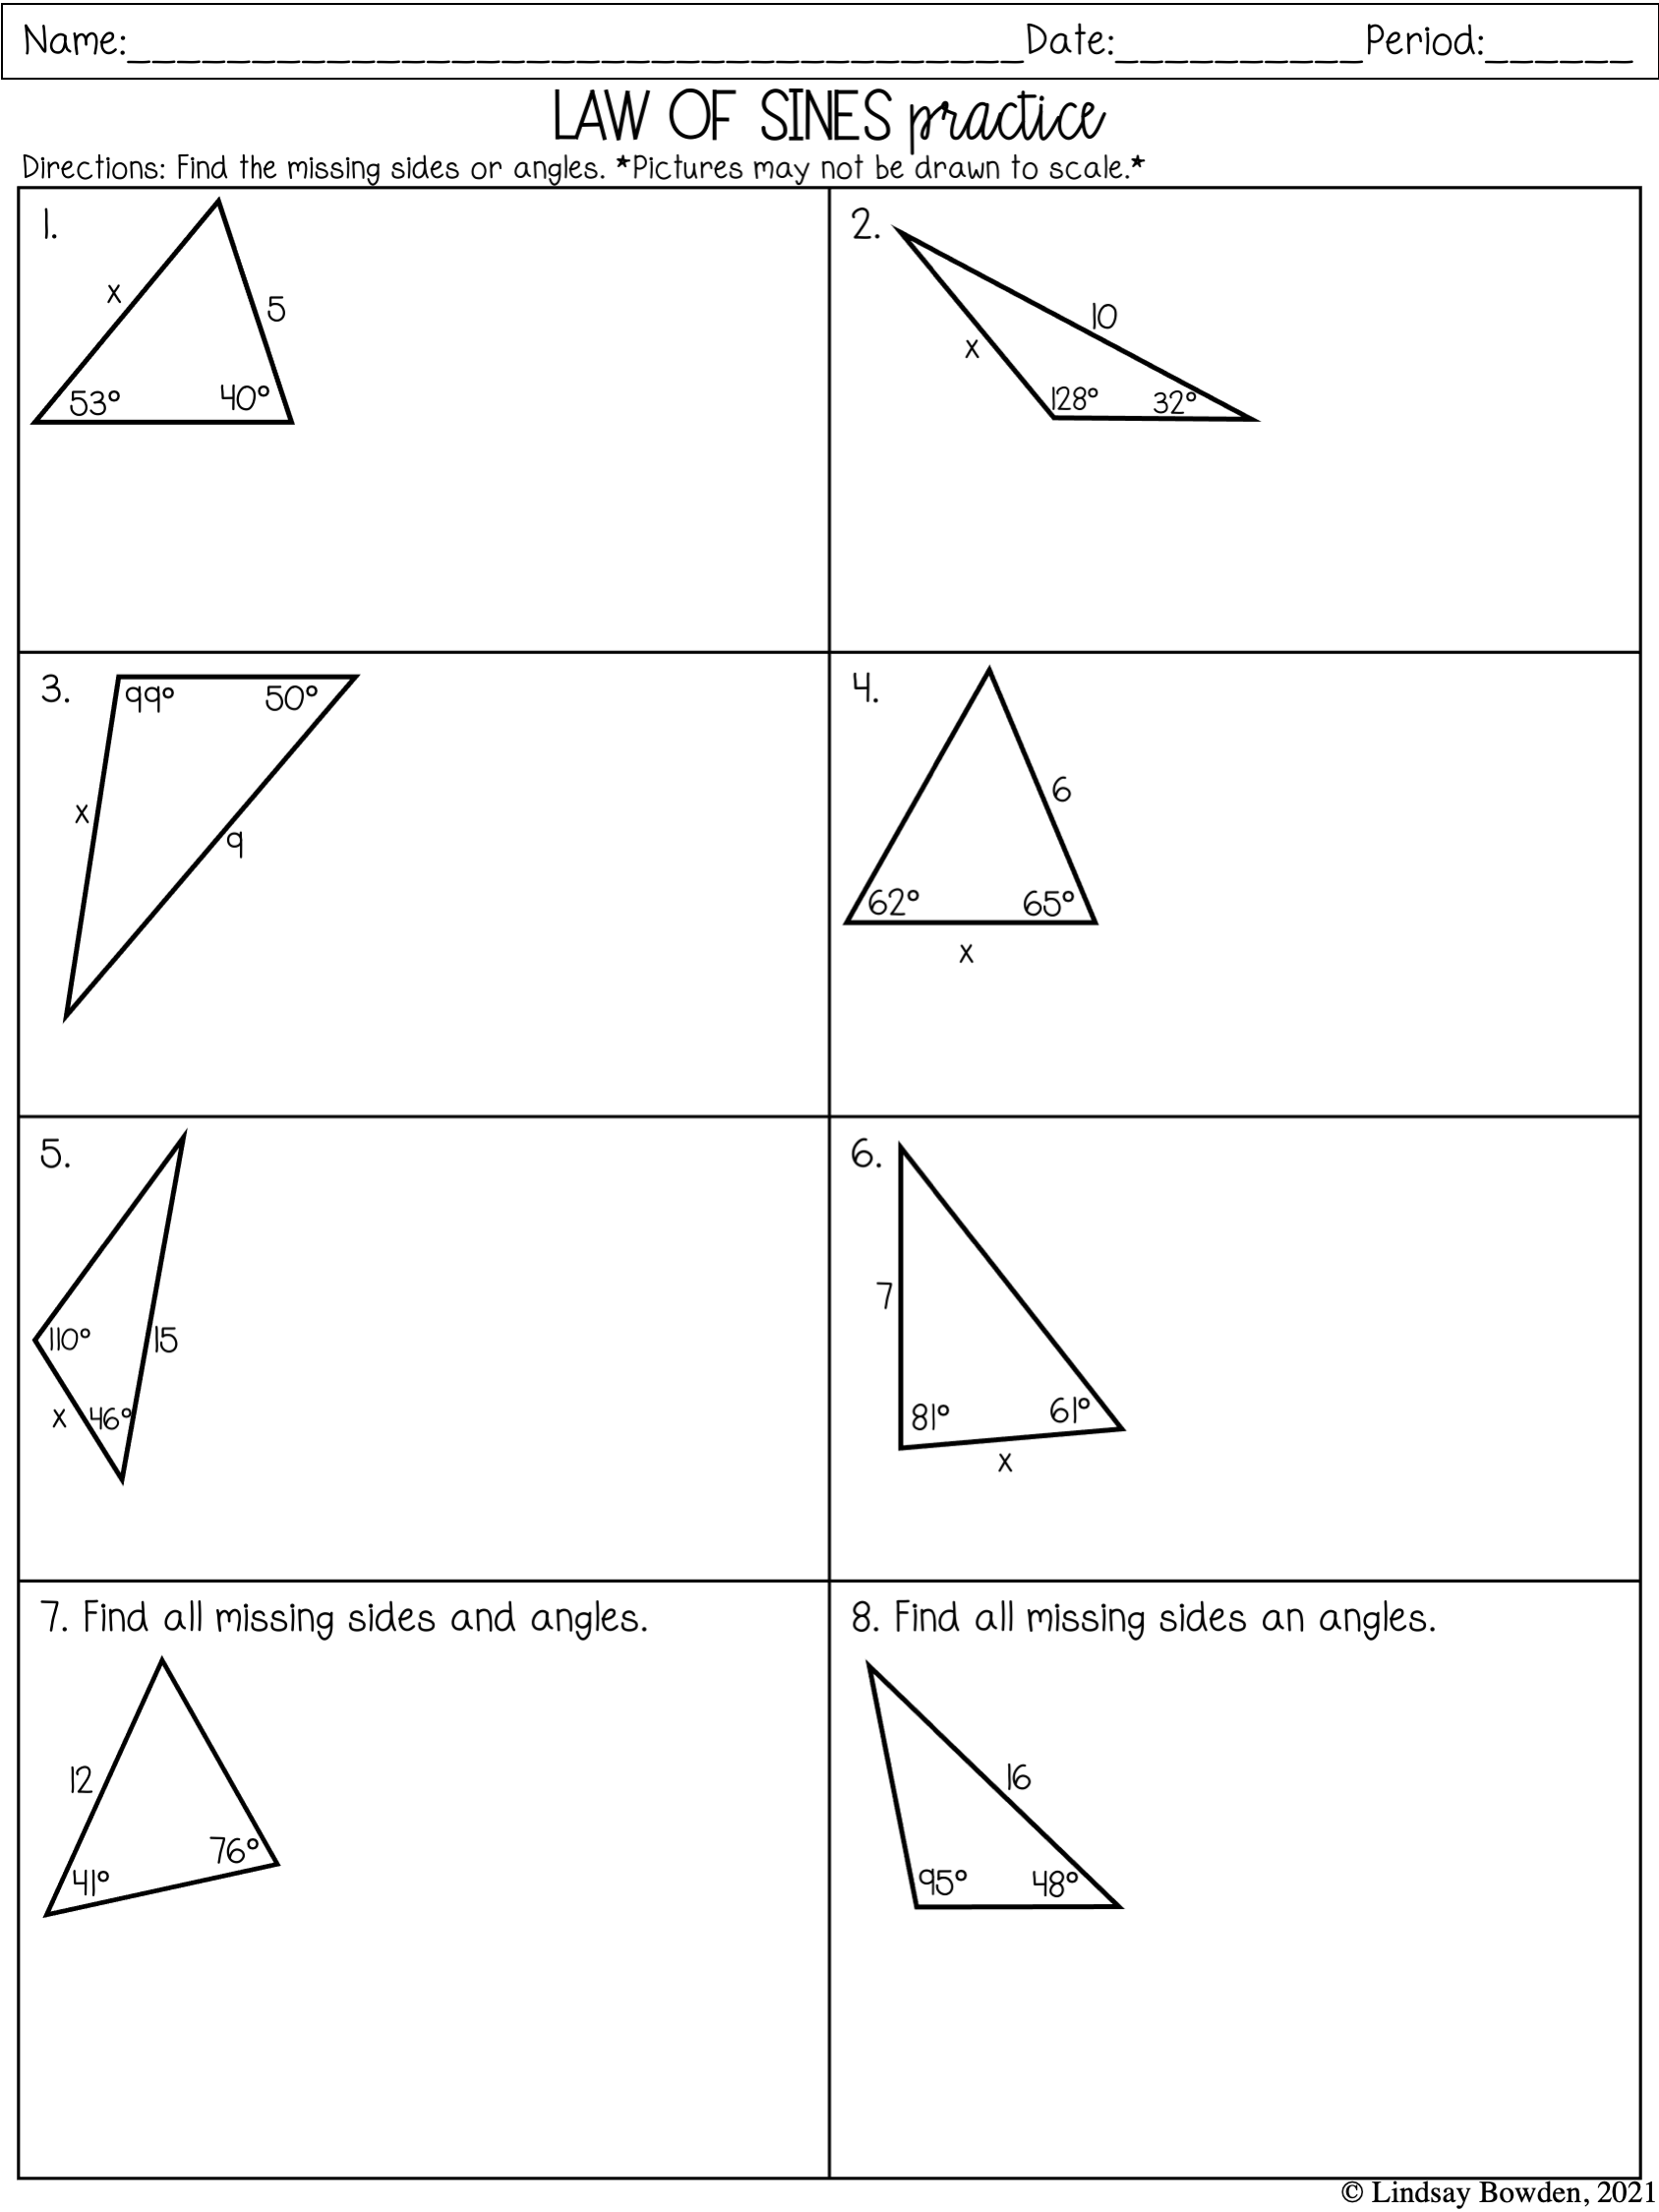 Law of Sines and Cosines Notes and Worksheets - Lindsay Bowden Inside Law Of Cosines Worksheet